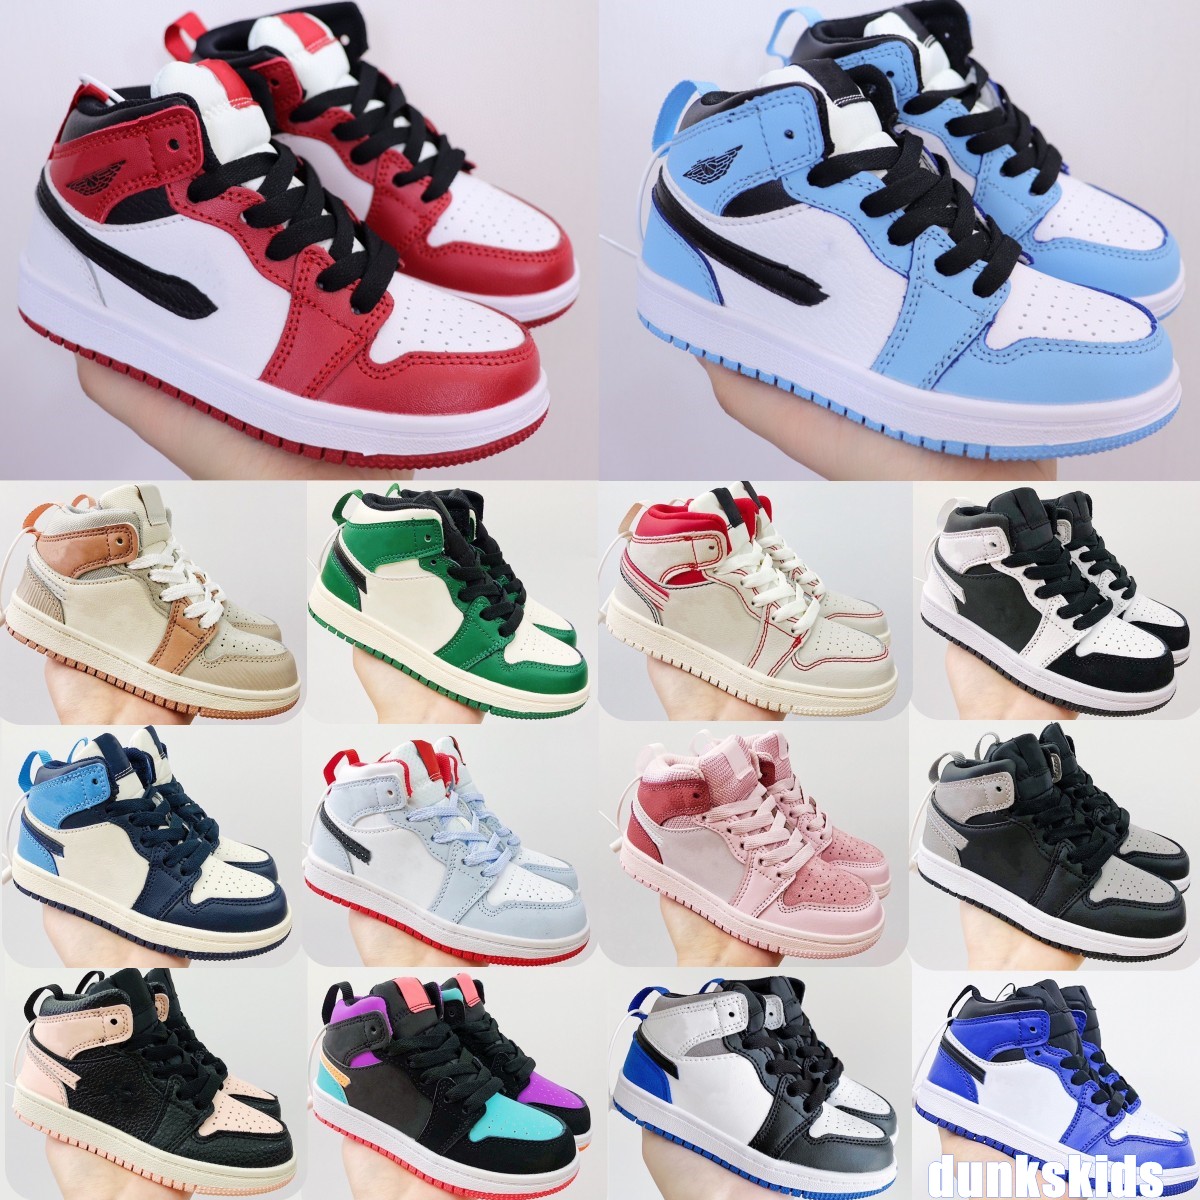 kids shoes Jumpman 1 1s Toddler Sneakers boys basketball shoe Children black mid sneaker Chicago designer University blue trainers baby pink kid youth shoe